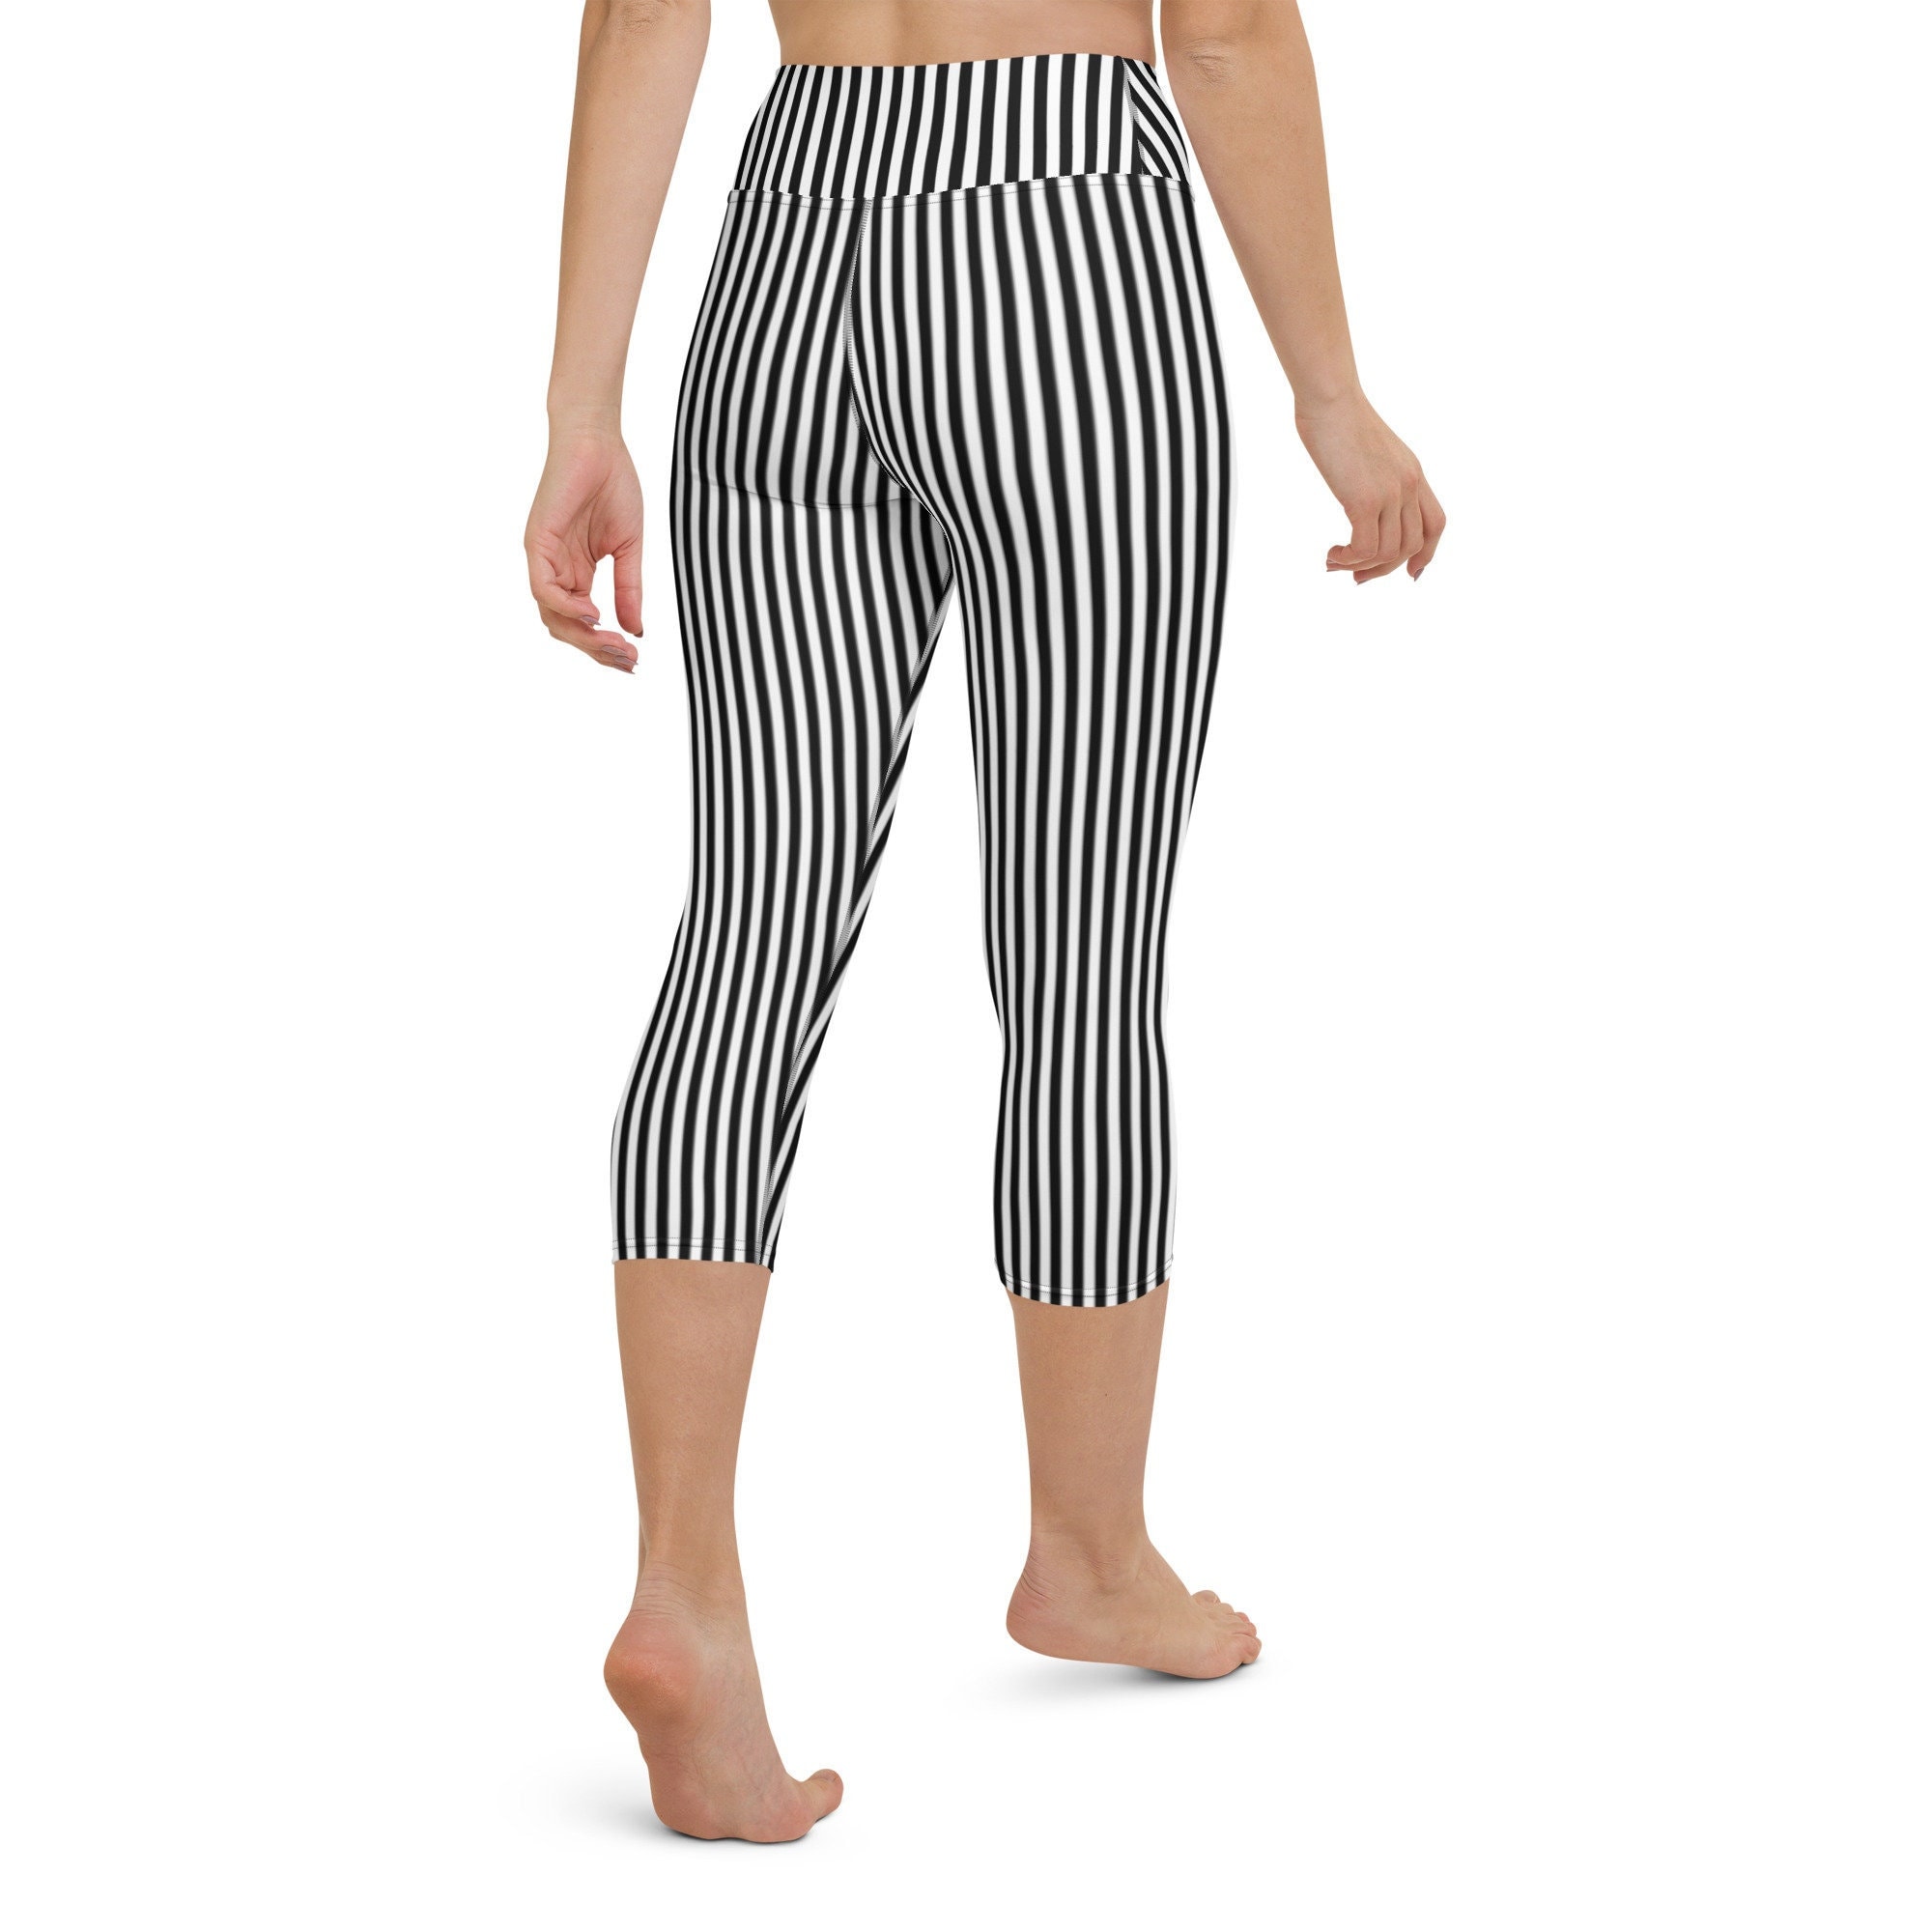 Vertical Striped Capri Leggings, Cropped Length, High Waisted, Black & White,  Yoga Pants, Lines Pattern, Stretchy Tights, Capsule Activewear 